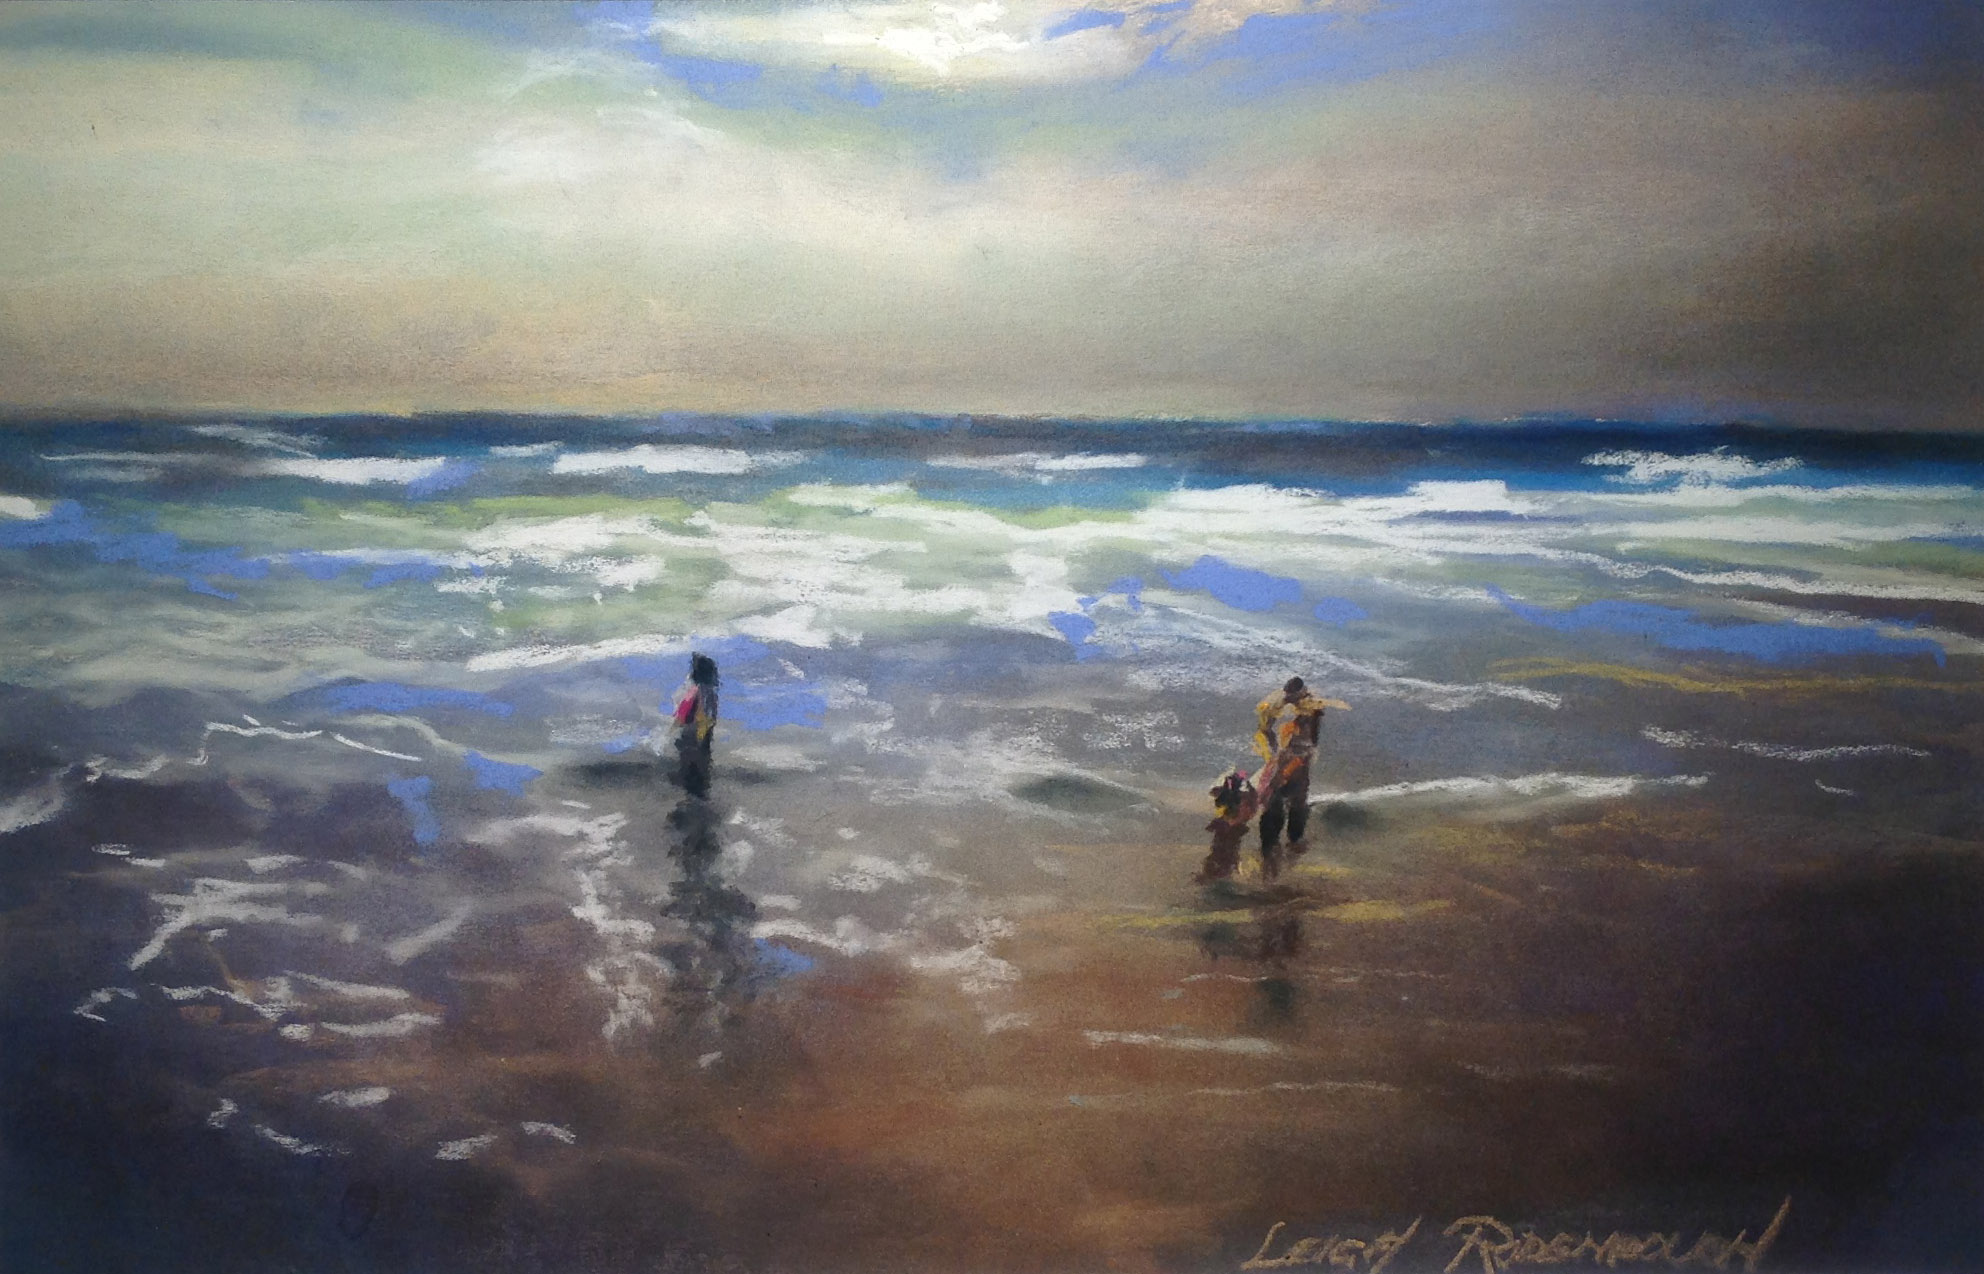 "Surf and Sand, Holden Beach" by Leigh Rodenbough